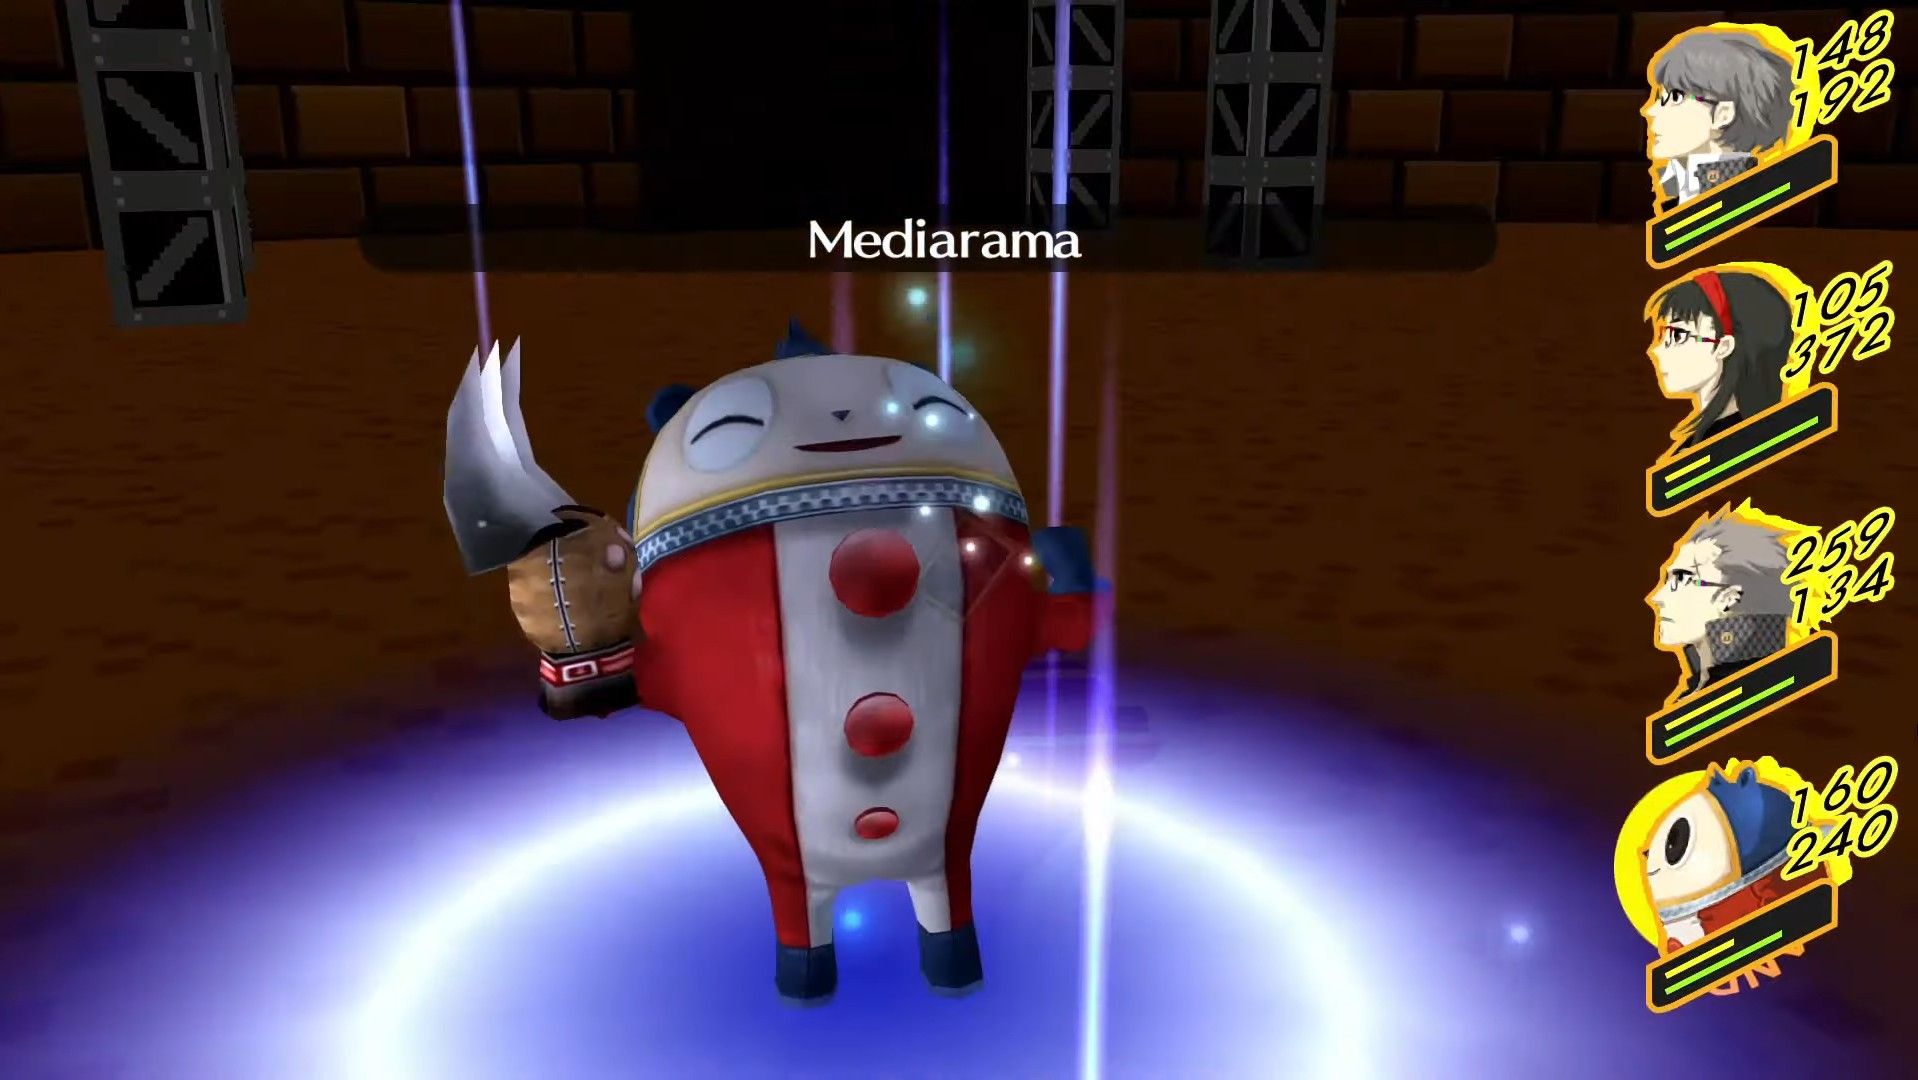 teddie casting mediarama to heal the party during the shadow mitsuo fight in persona 4 golden